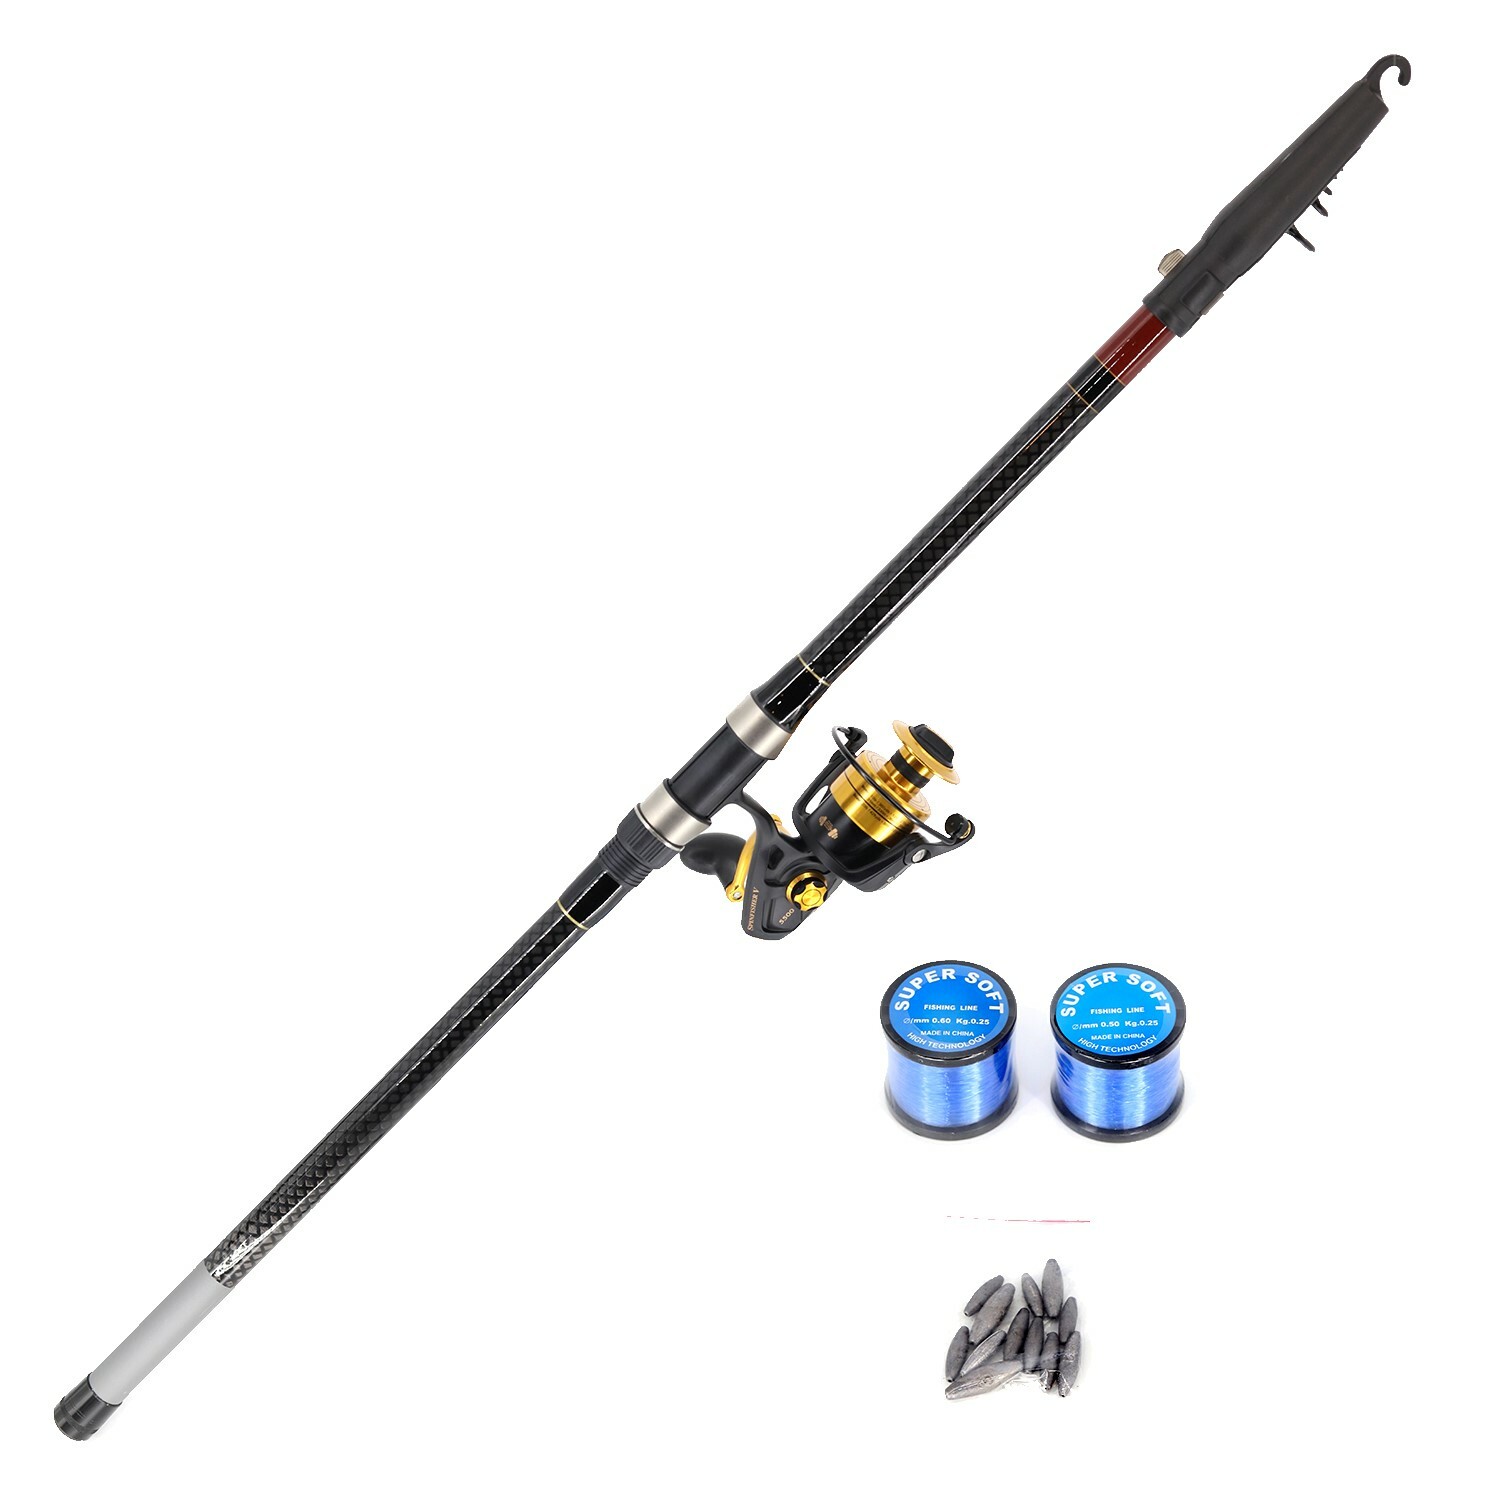 Shore Fishing (Pilot 5.4m and Penn V5500 including Nylon line with rigs and sinkers) Combo